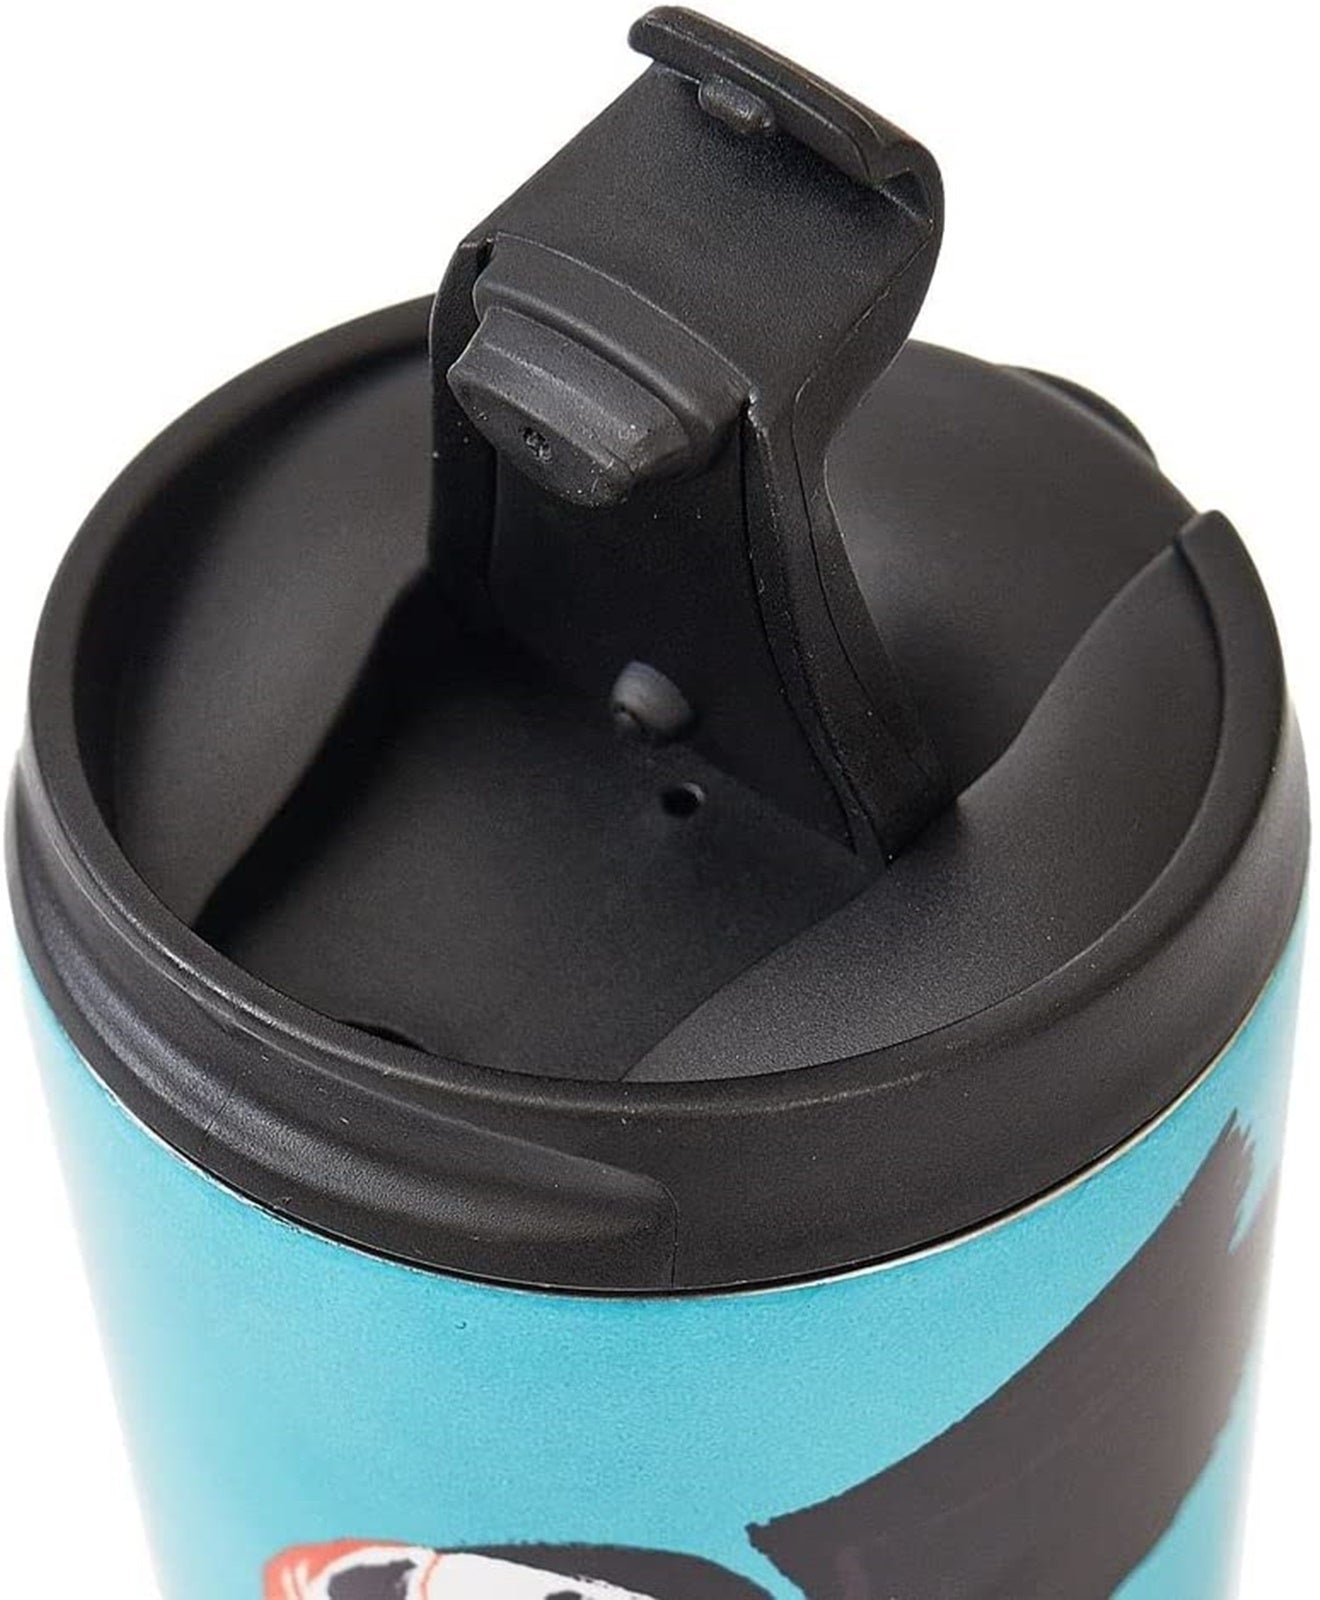 Eco Chic Reusable Thermal Coffee Cup | Stainless Steel Insulated Travel Mug with Leakproof Lid | Eco-Friendly and Reusable for Hot & Cold Drinks (Teal Puffin, 380ml/13oz)